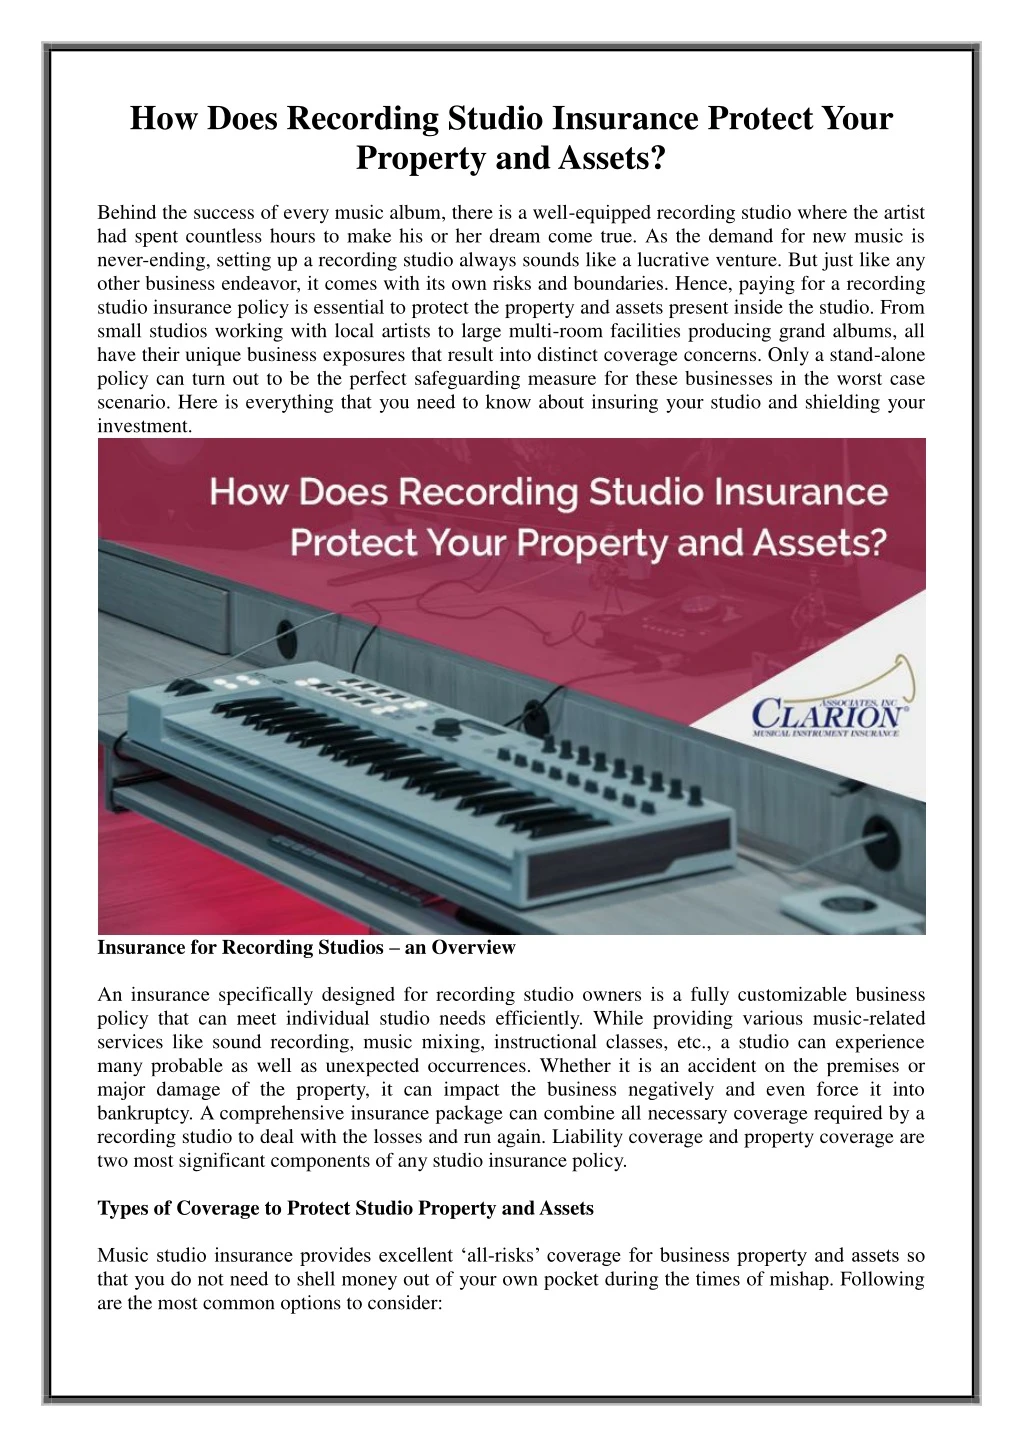 how does recording studio insurance protect your